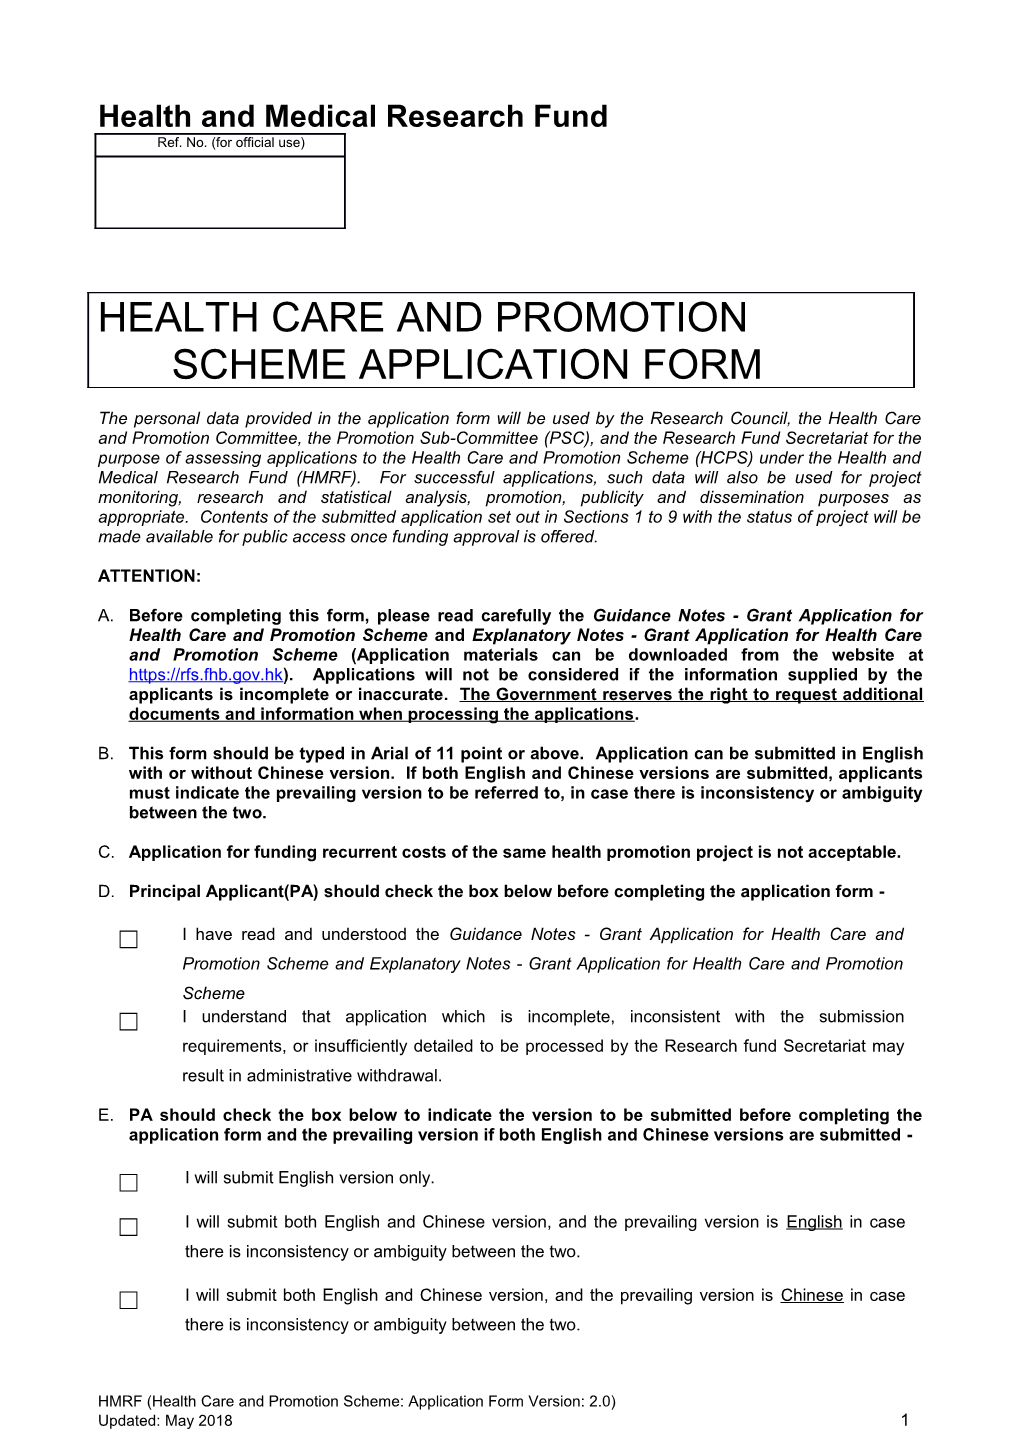 Form a - for Health Promotion Project